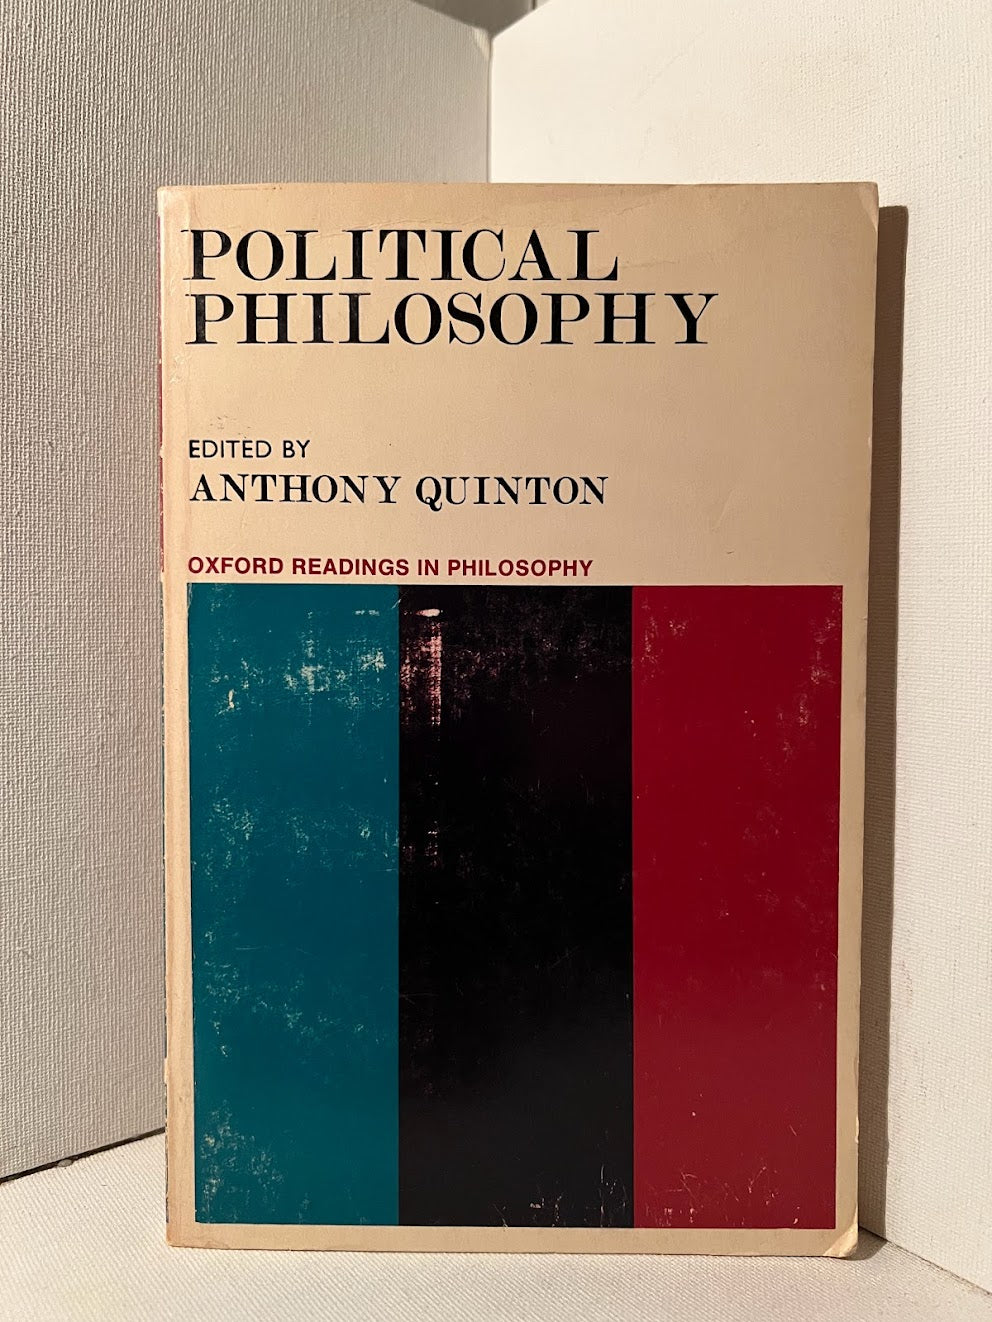 Political Philosophy edited by Anthony Quinton